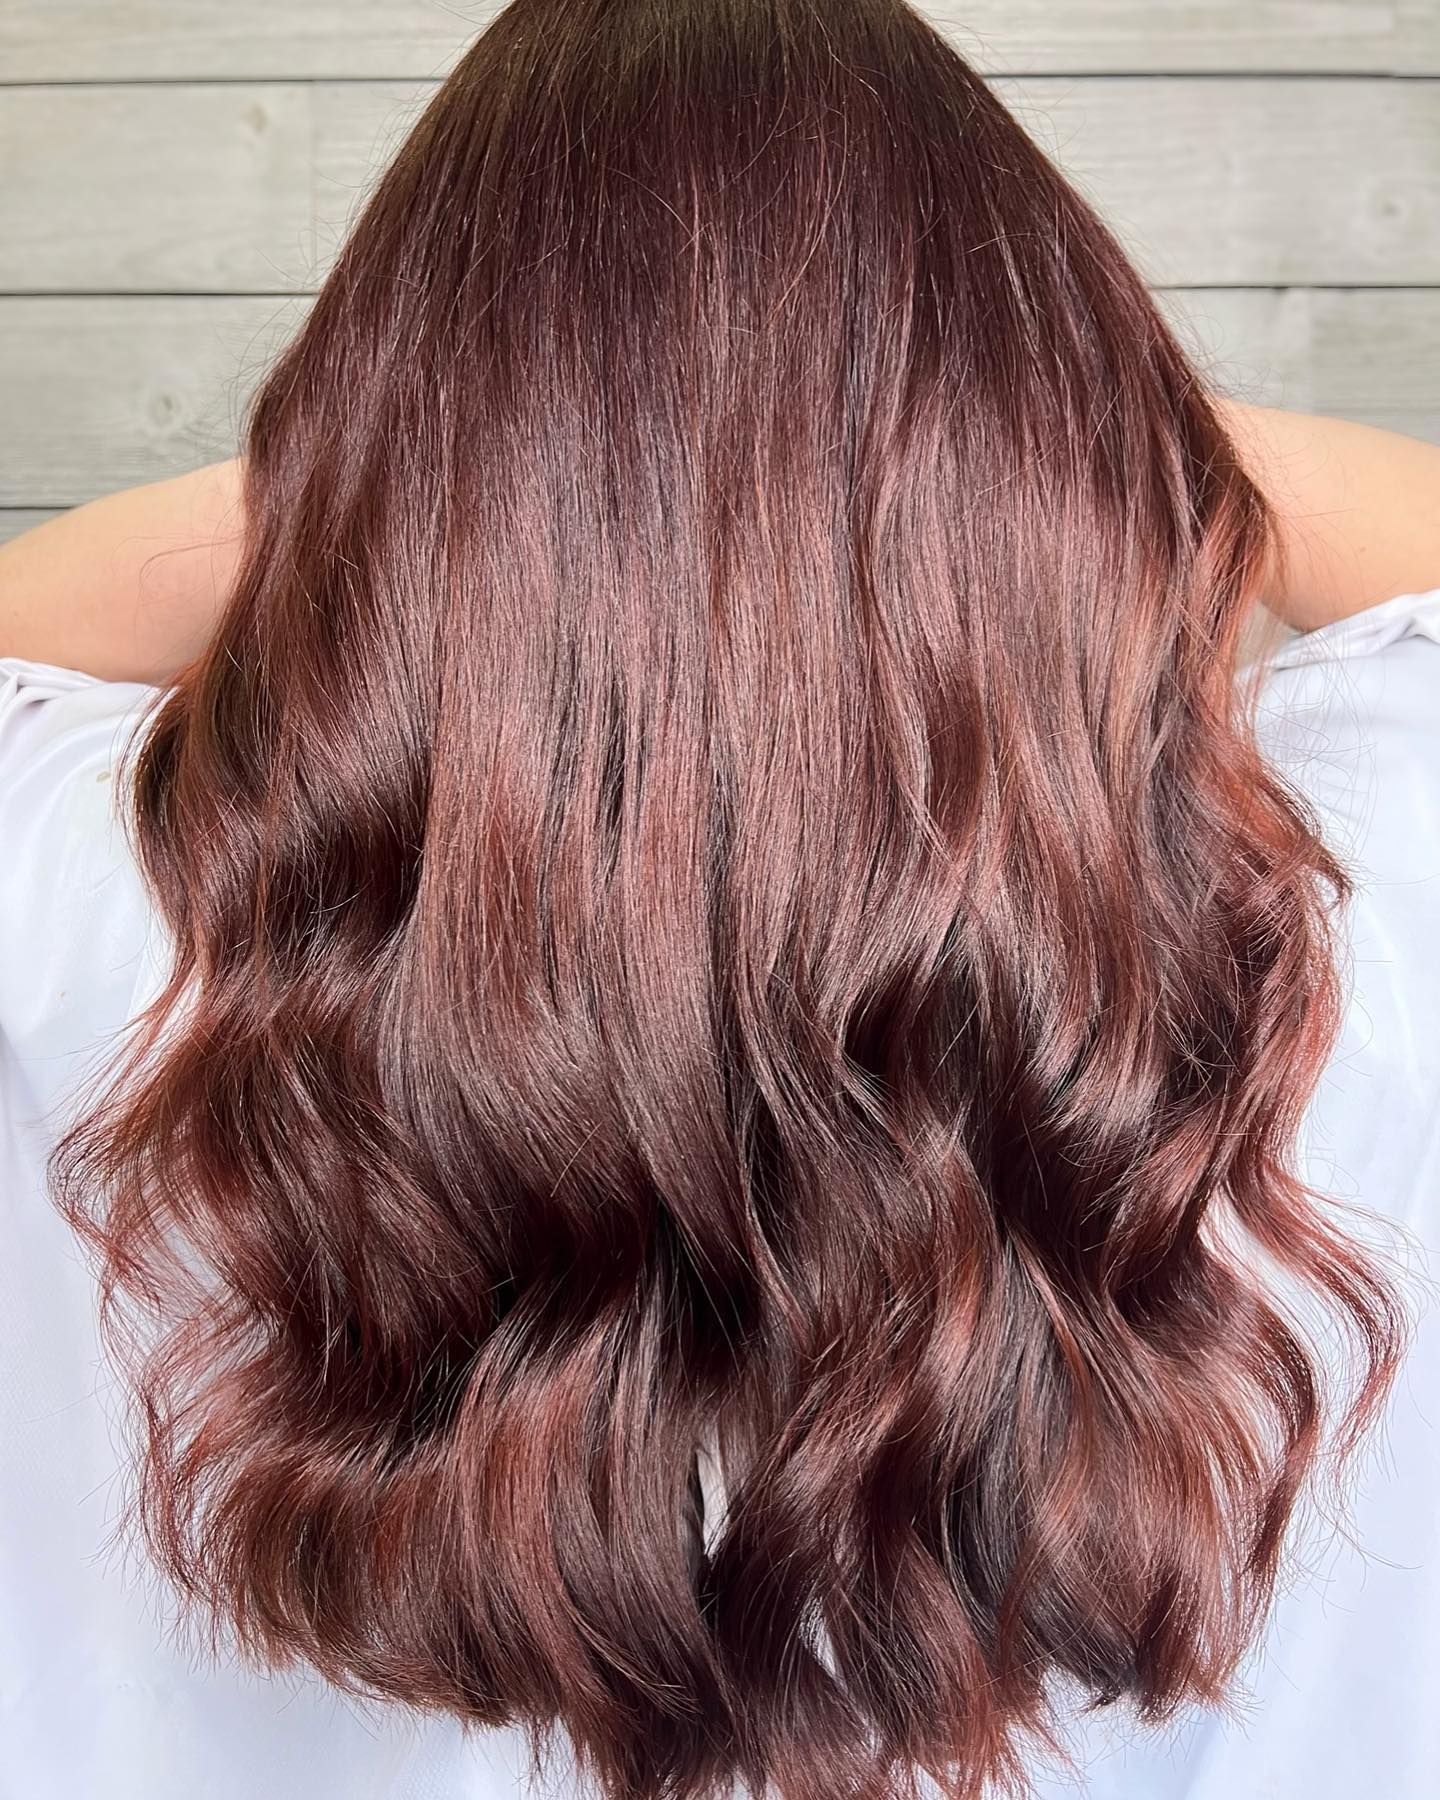 red ombre hair style 52 Natural red ombre hair | Red ombre background | Red ombre hair Red Ombre Hairstyles